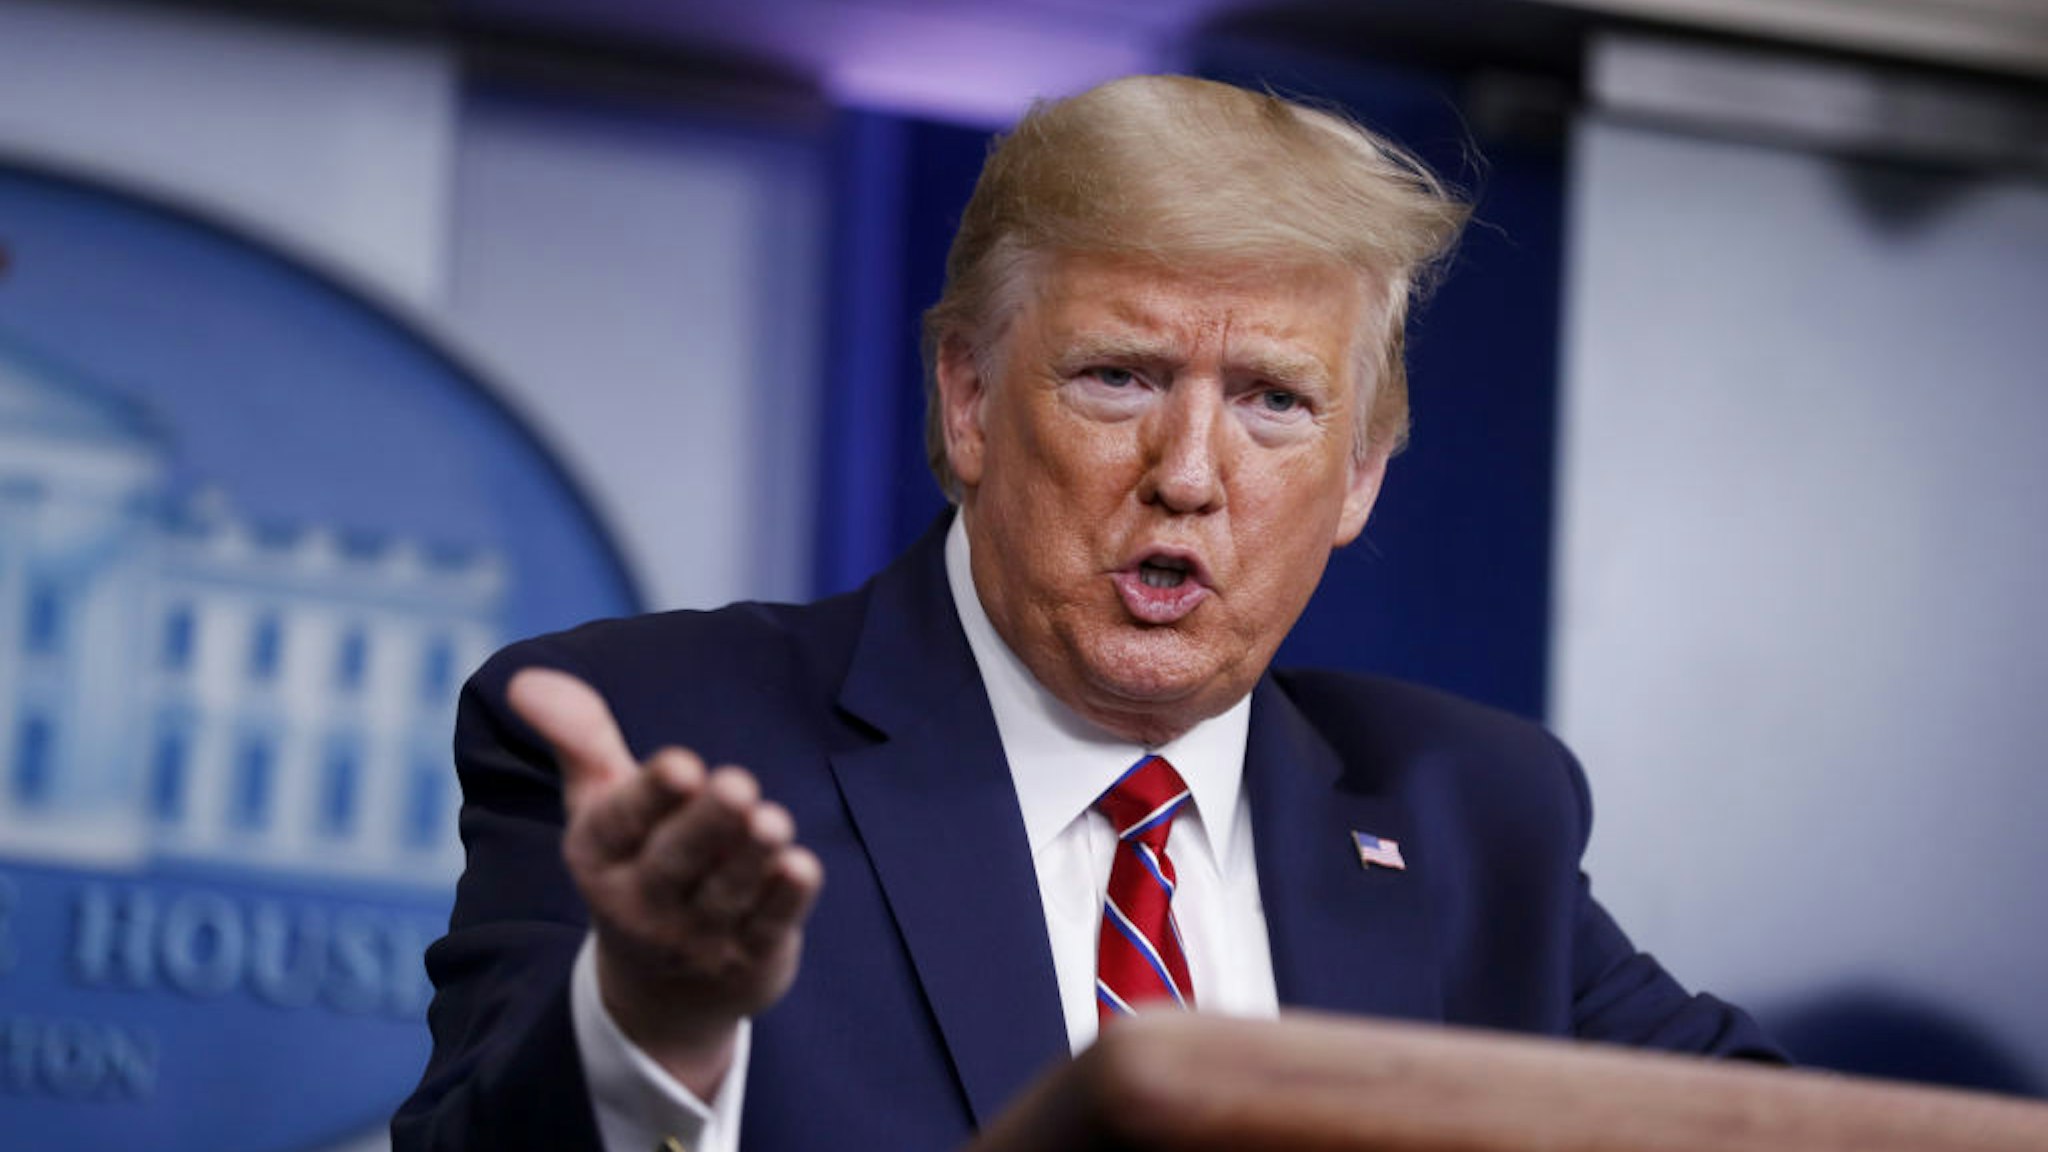 U.S. President Donald Trump speaks during a Coronavirus Task Force news conference in the briefing room of the White House in Washington, D.C., U.S., on Friday, March 20, 2020.